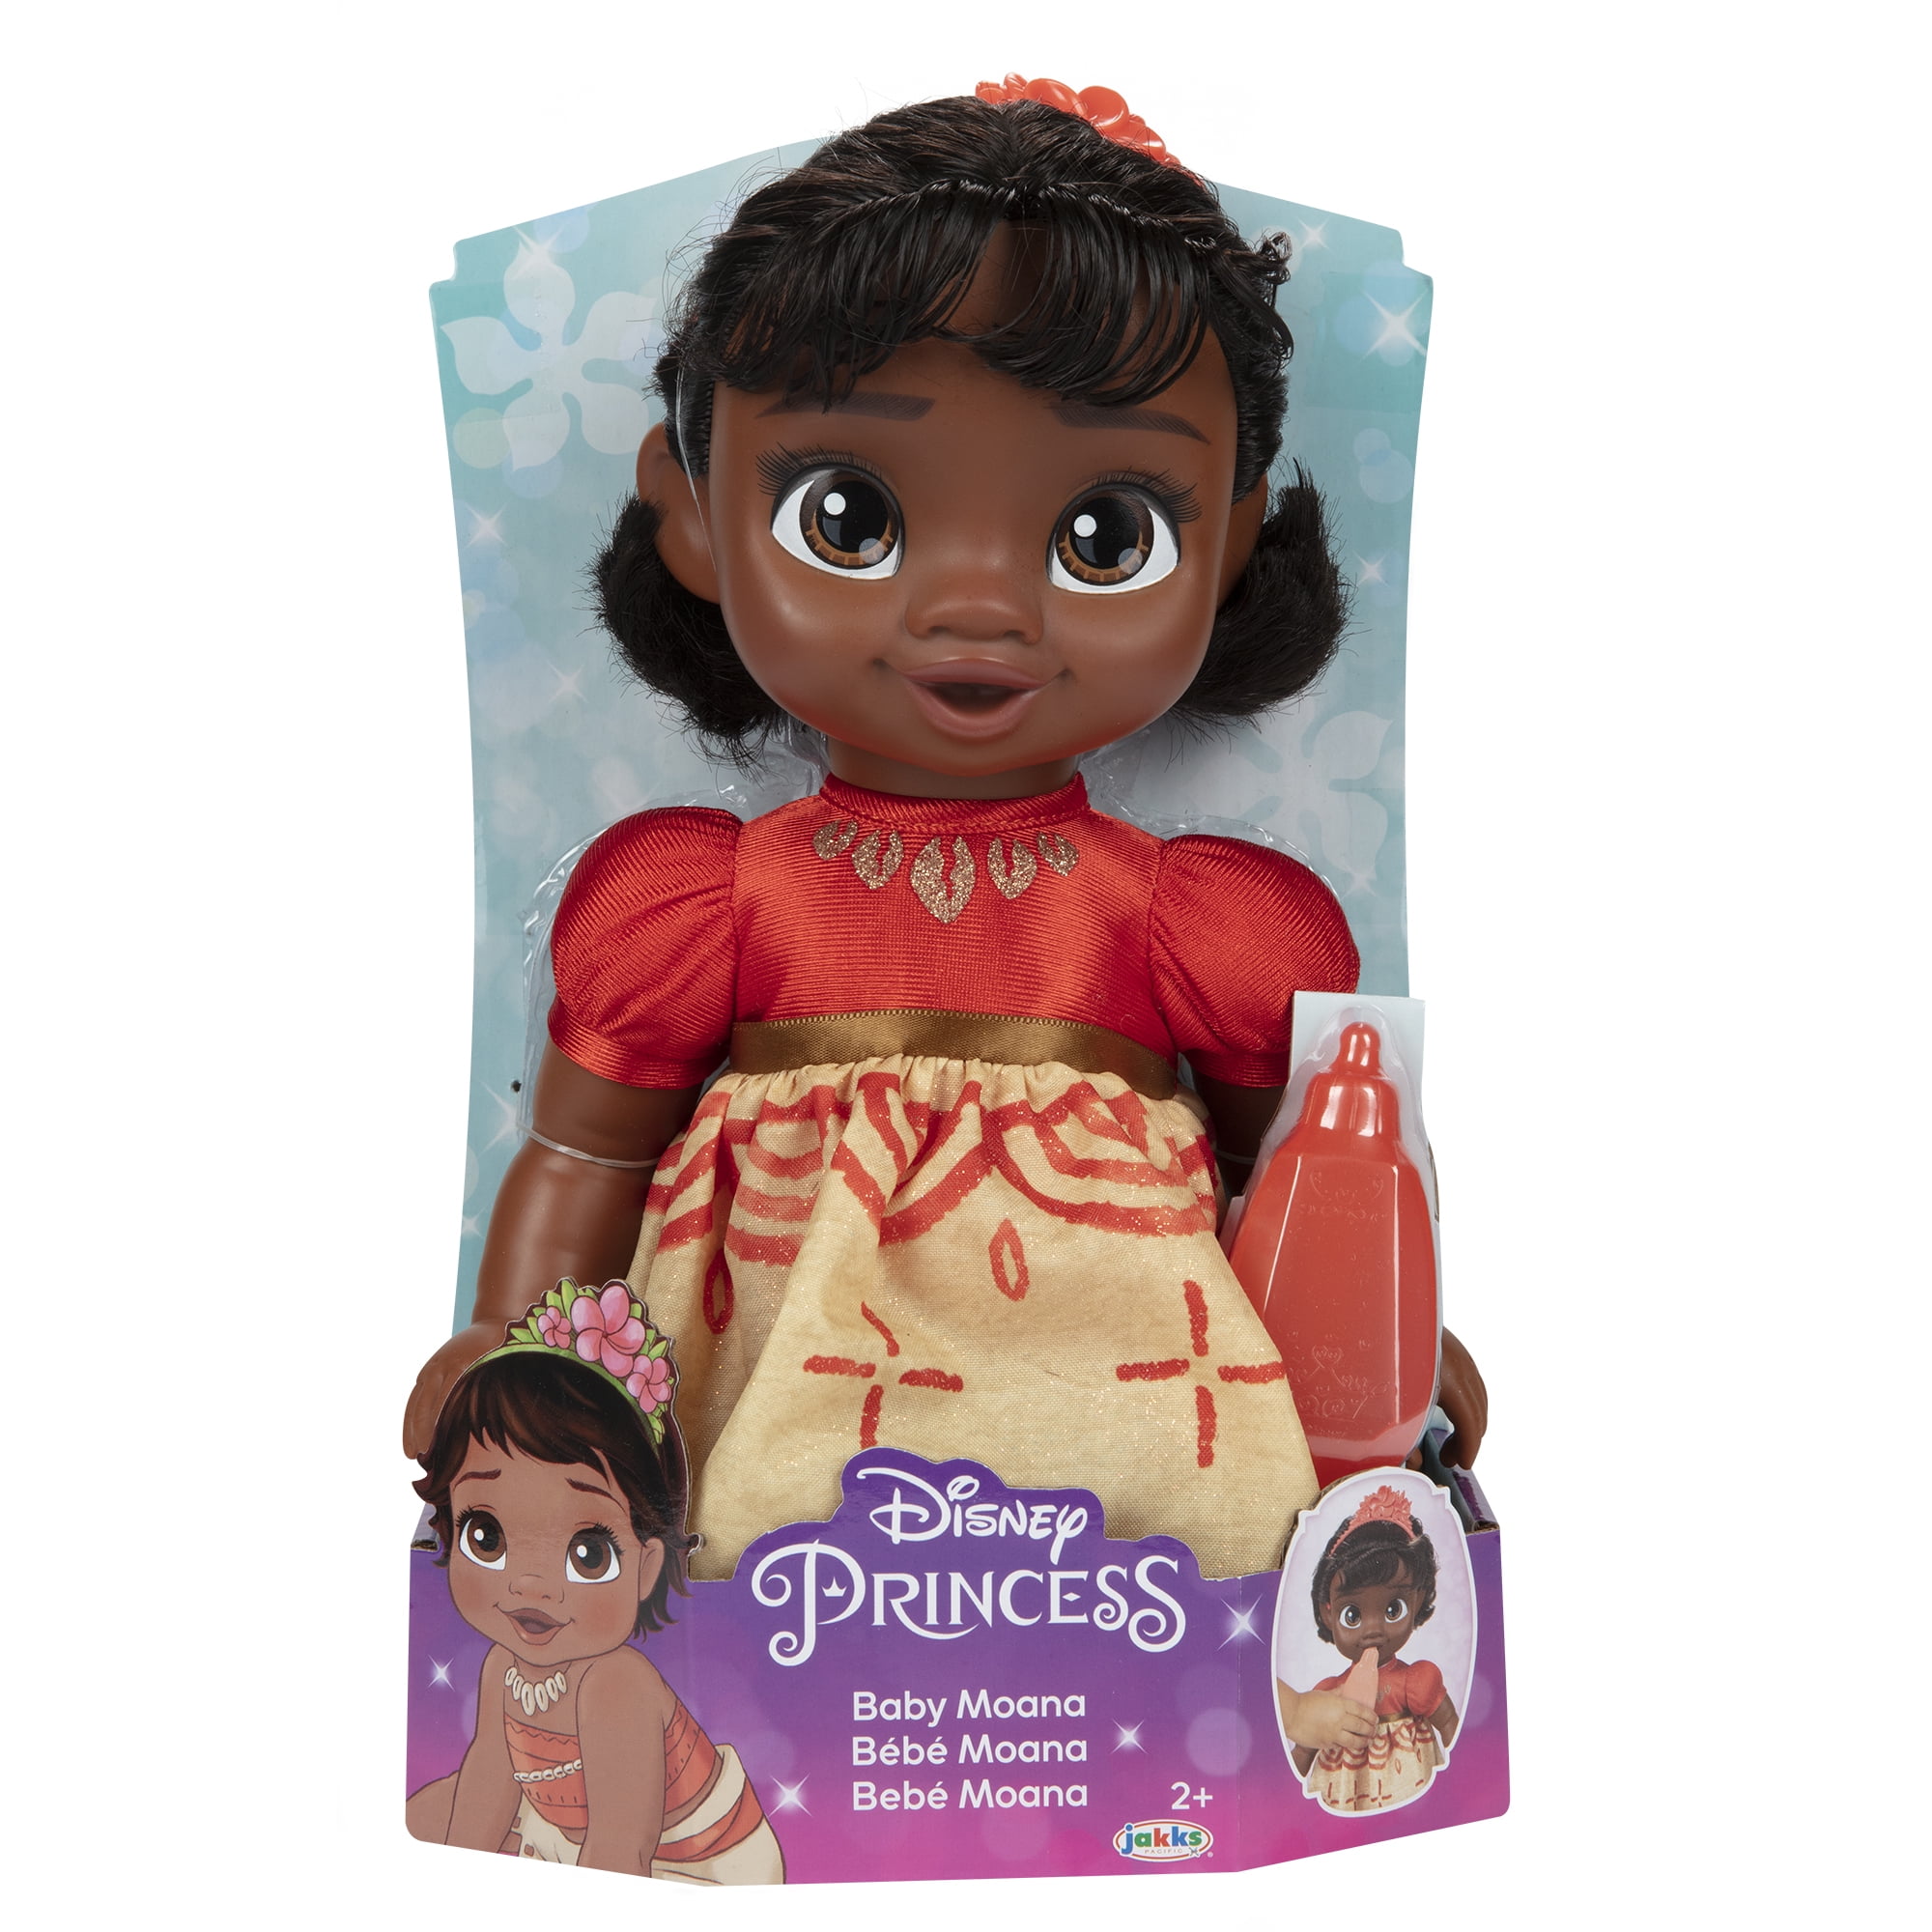 Disney Princess Deluxe Moana Baby Doll Includes Tiara And Bottle For Girls Ages 2 Walmart Com